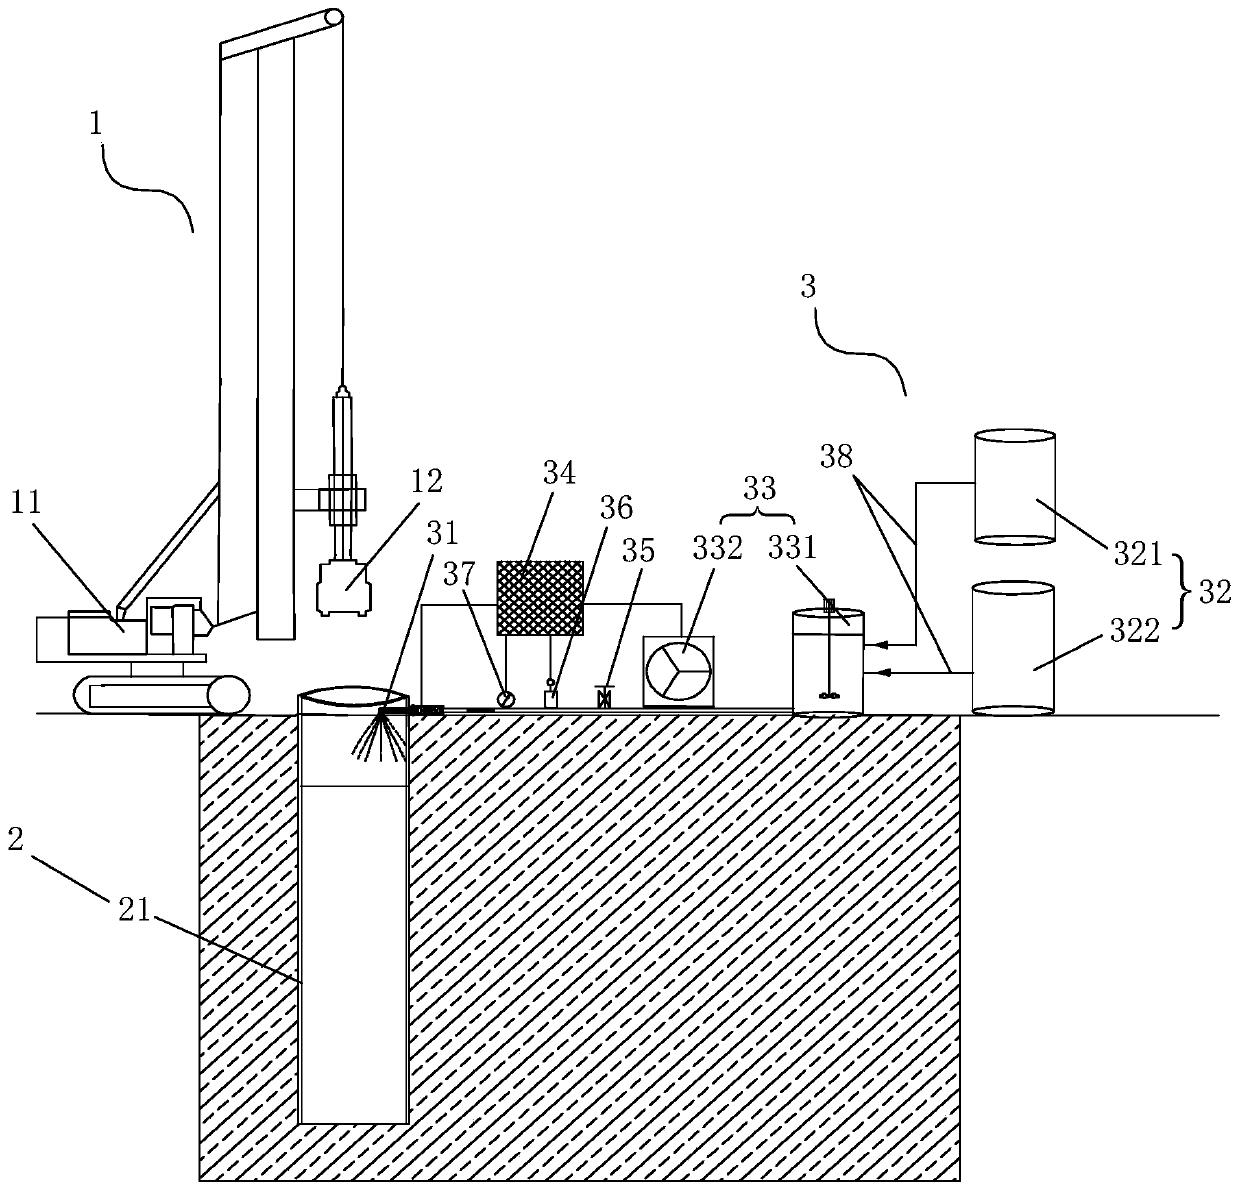 Contaminated soil closed sampling system and soil sampling and replacement remediation method